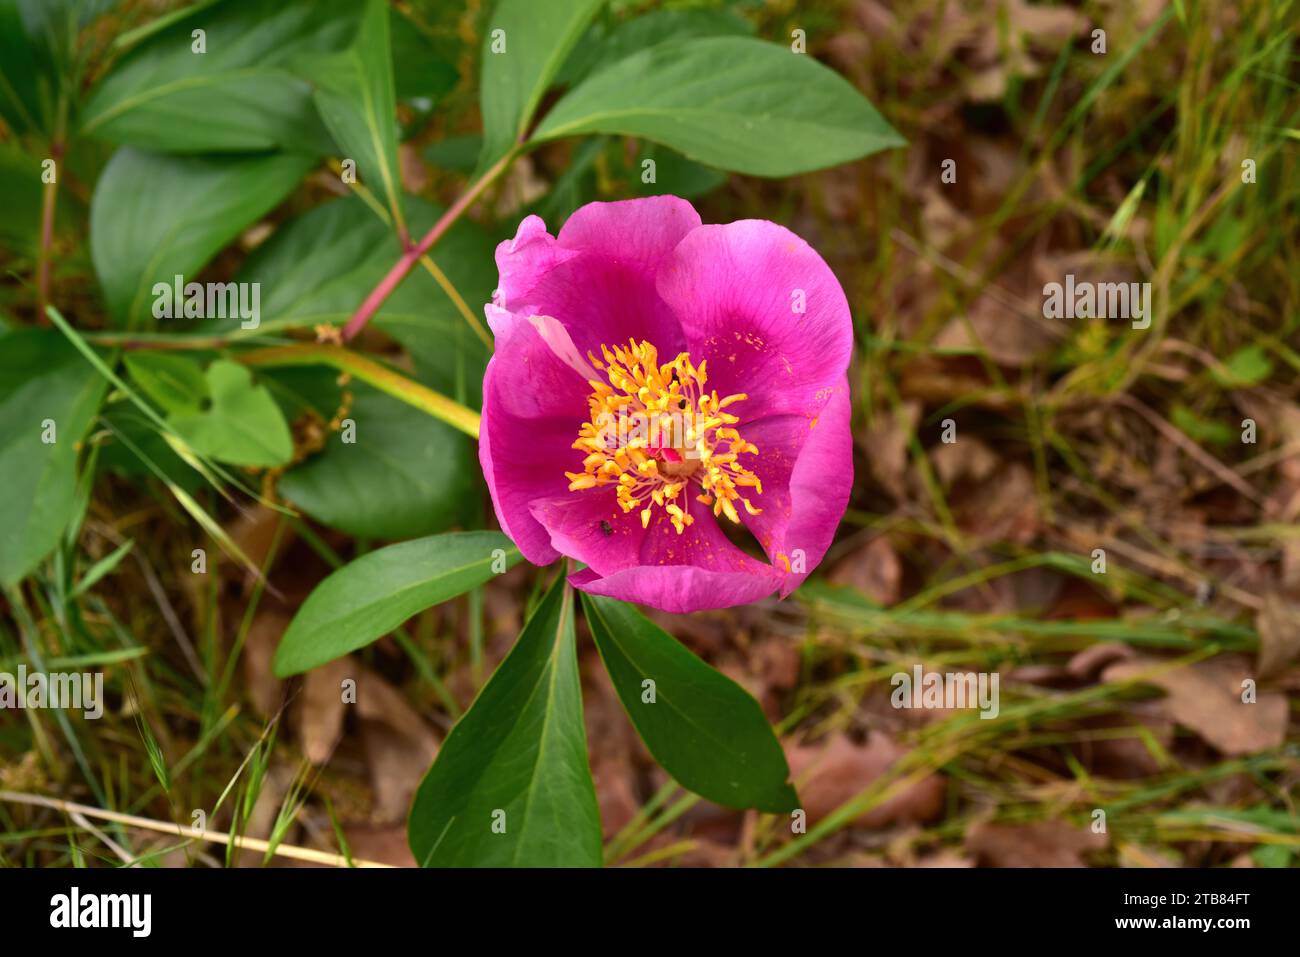 Rosa alabardera (Paeonia broteri or Paeonia broteroi) is a perennial herb endemic to Spain and Portugal. This photo was taken in Arribes del Duero Nat Stock Photo